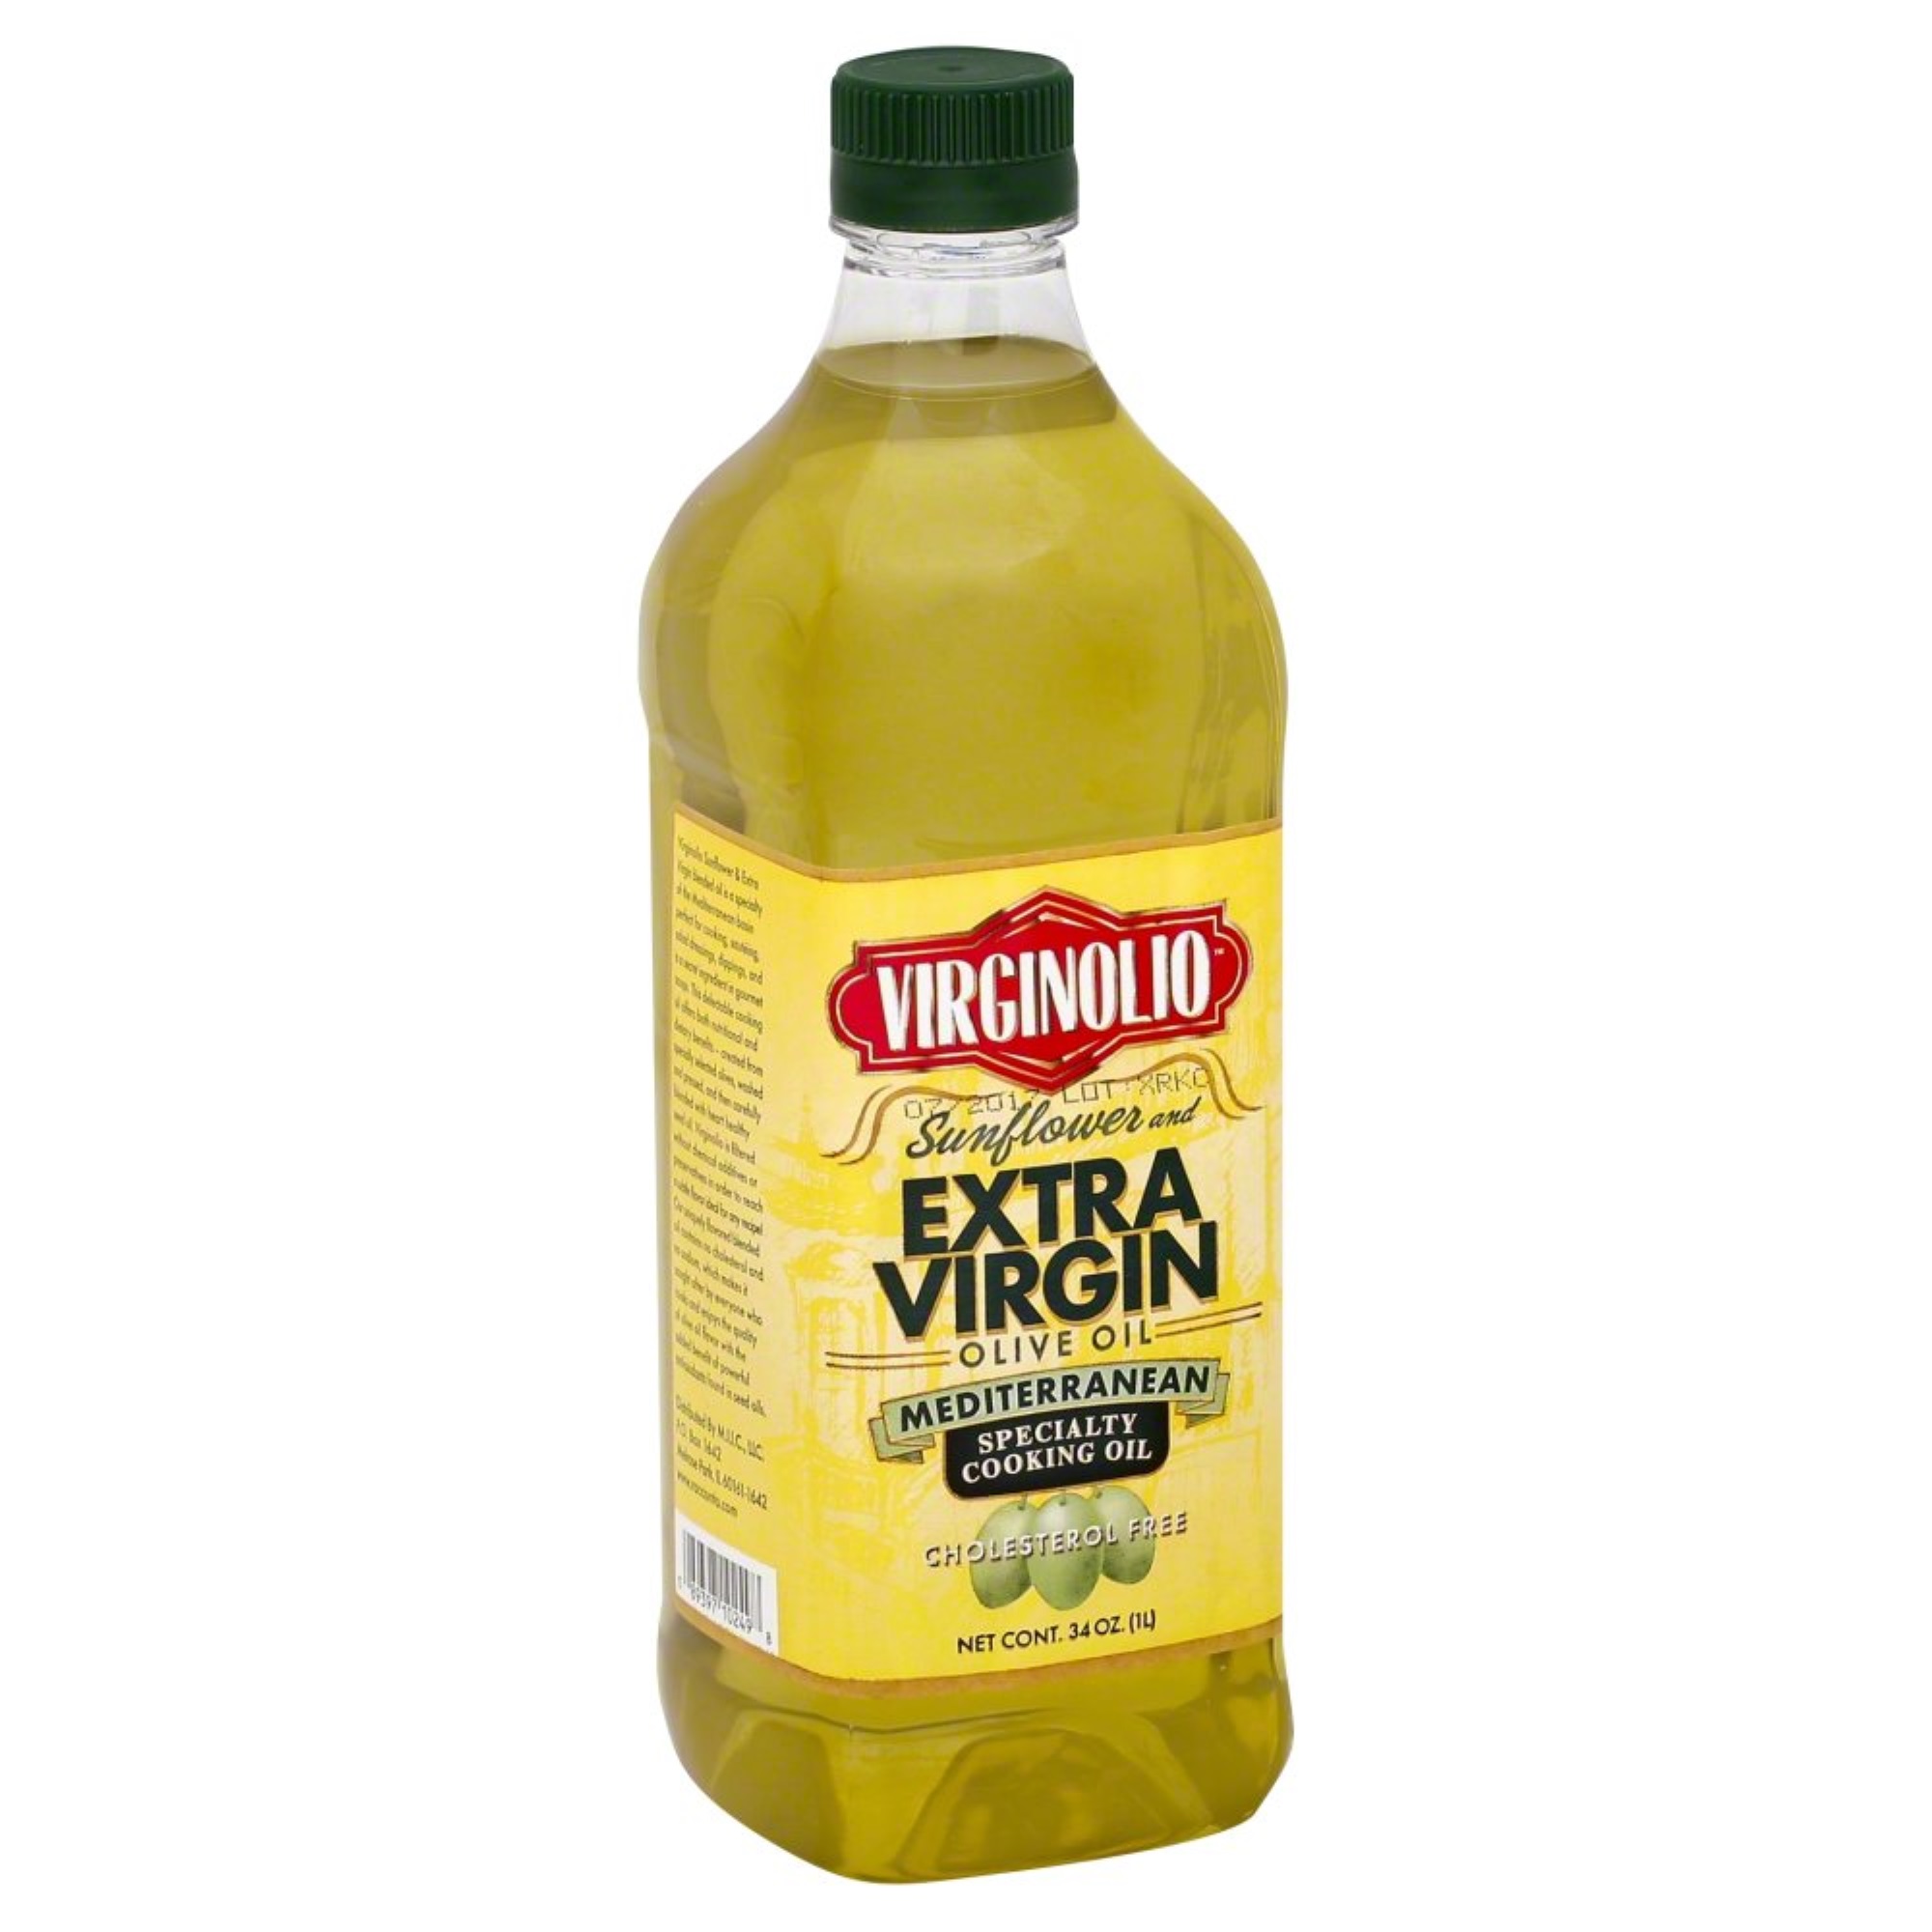 Racconto OIL OLIVE BLENDED (Pack of 12)